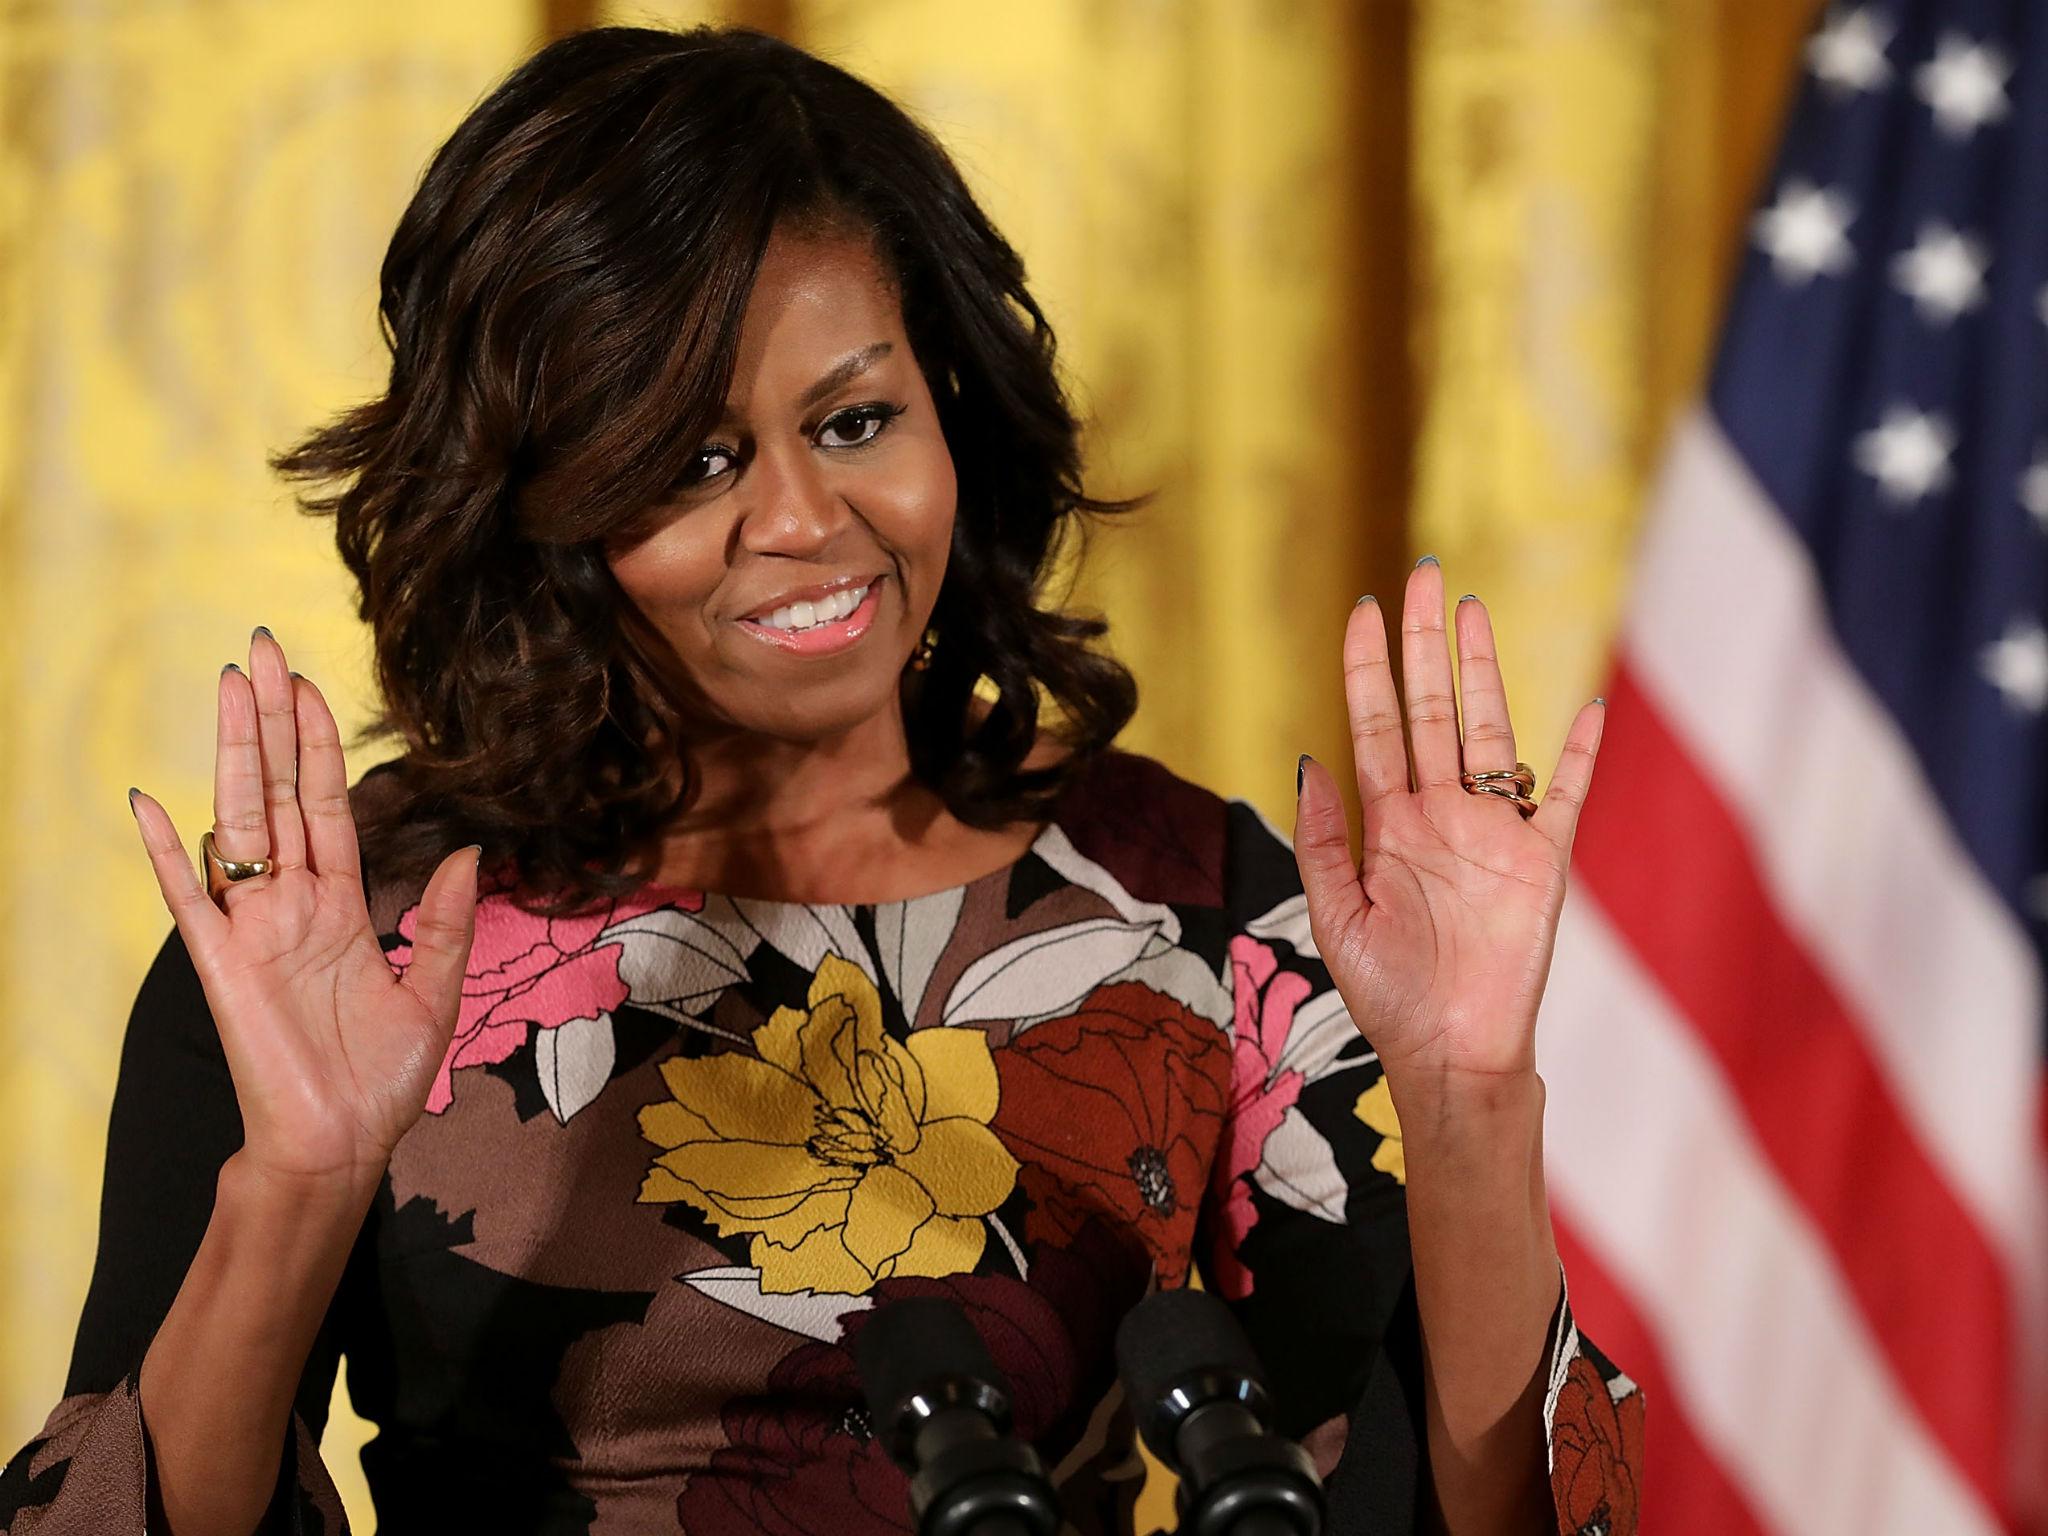 Both Michelle and Barack Obama have denied suggestions she would run for President